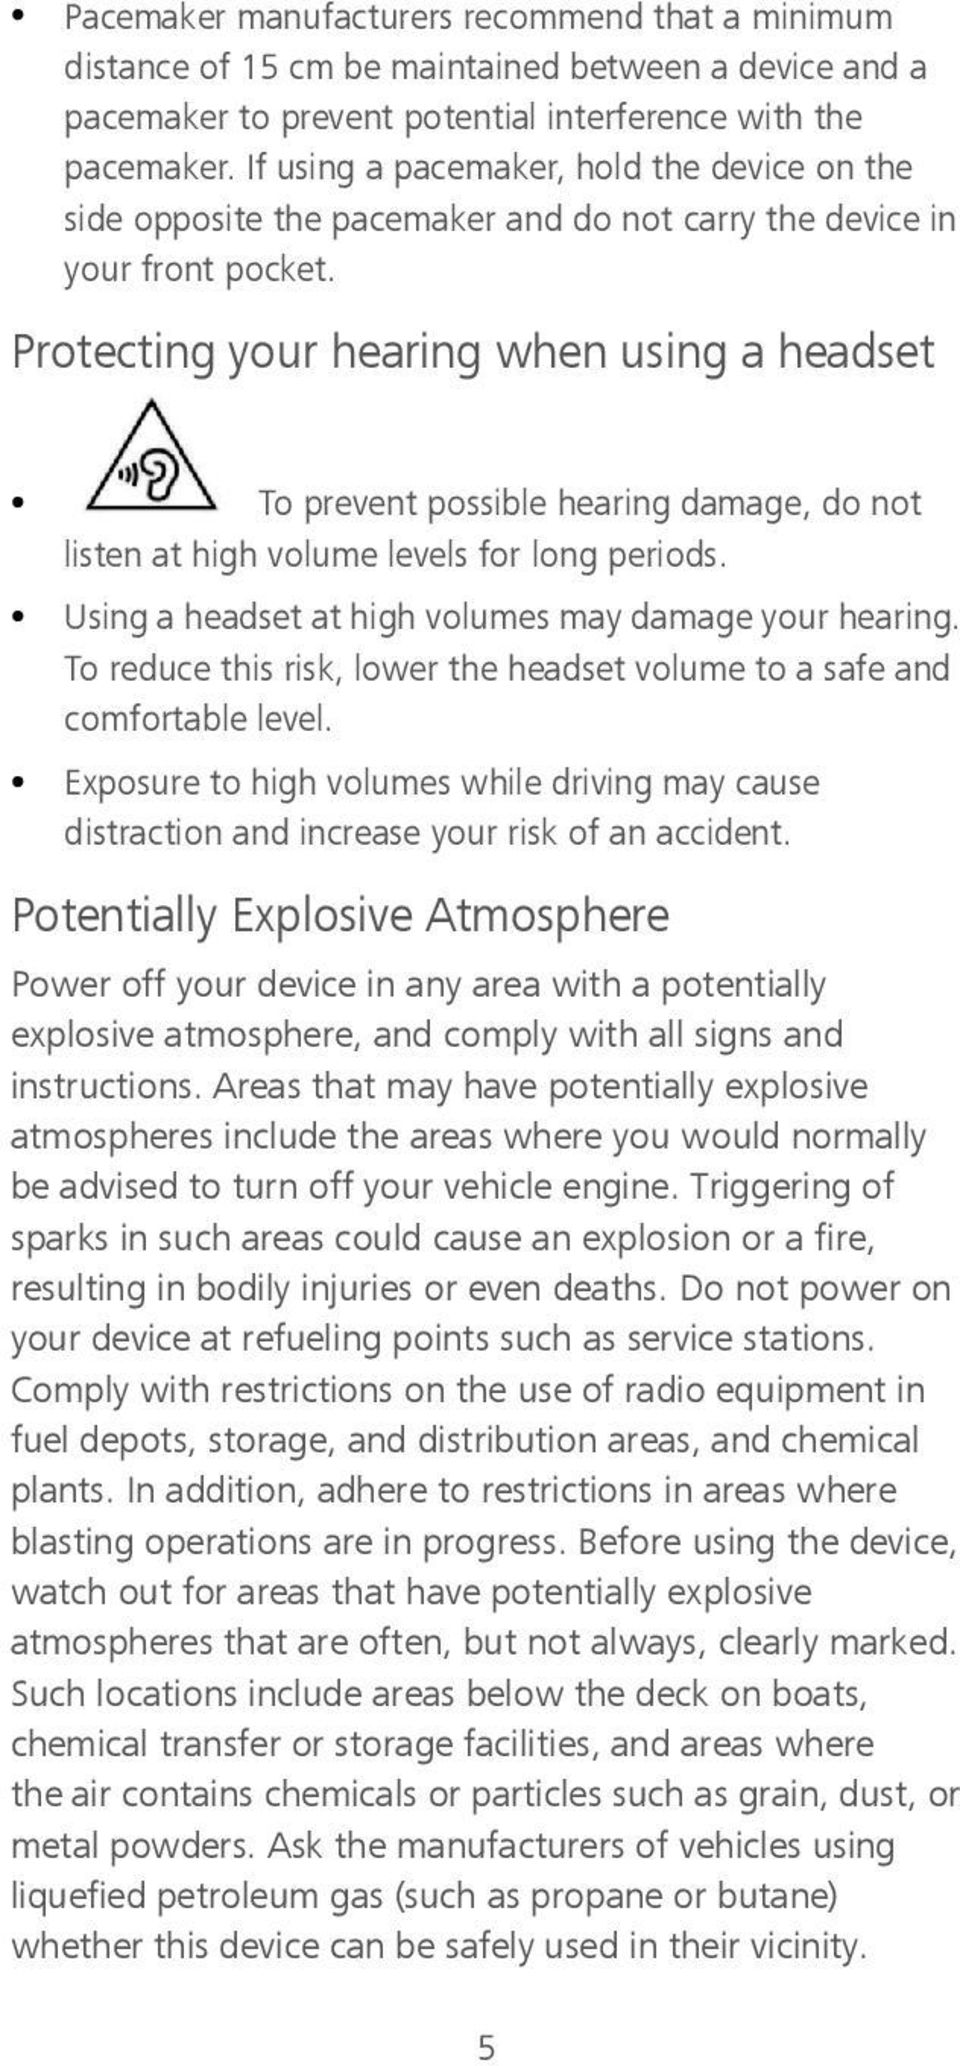 Protecting your hearing when using a headset To prevent possible hearing damage, do not listen at high volume levels for long periods. Using a headset at high volumes may damage your hearing.